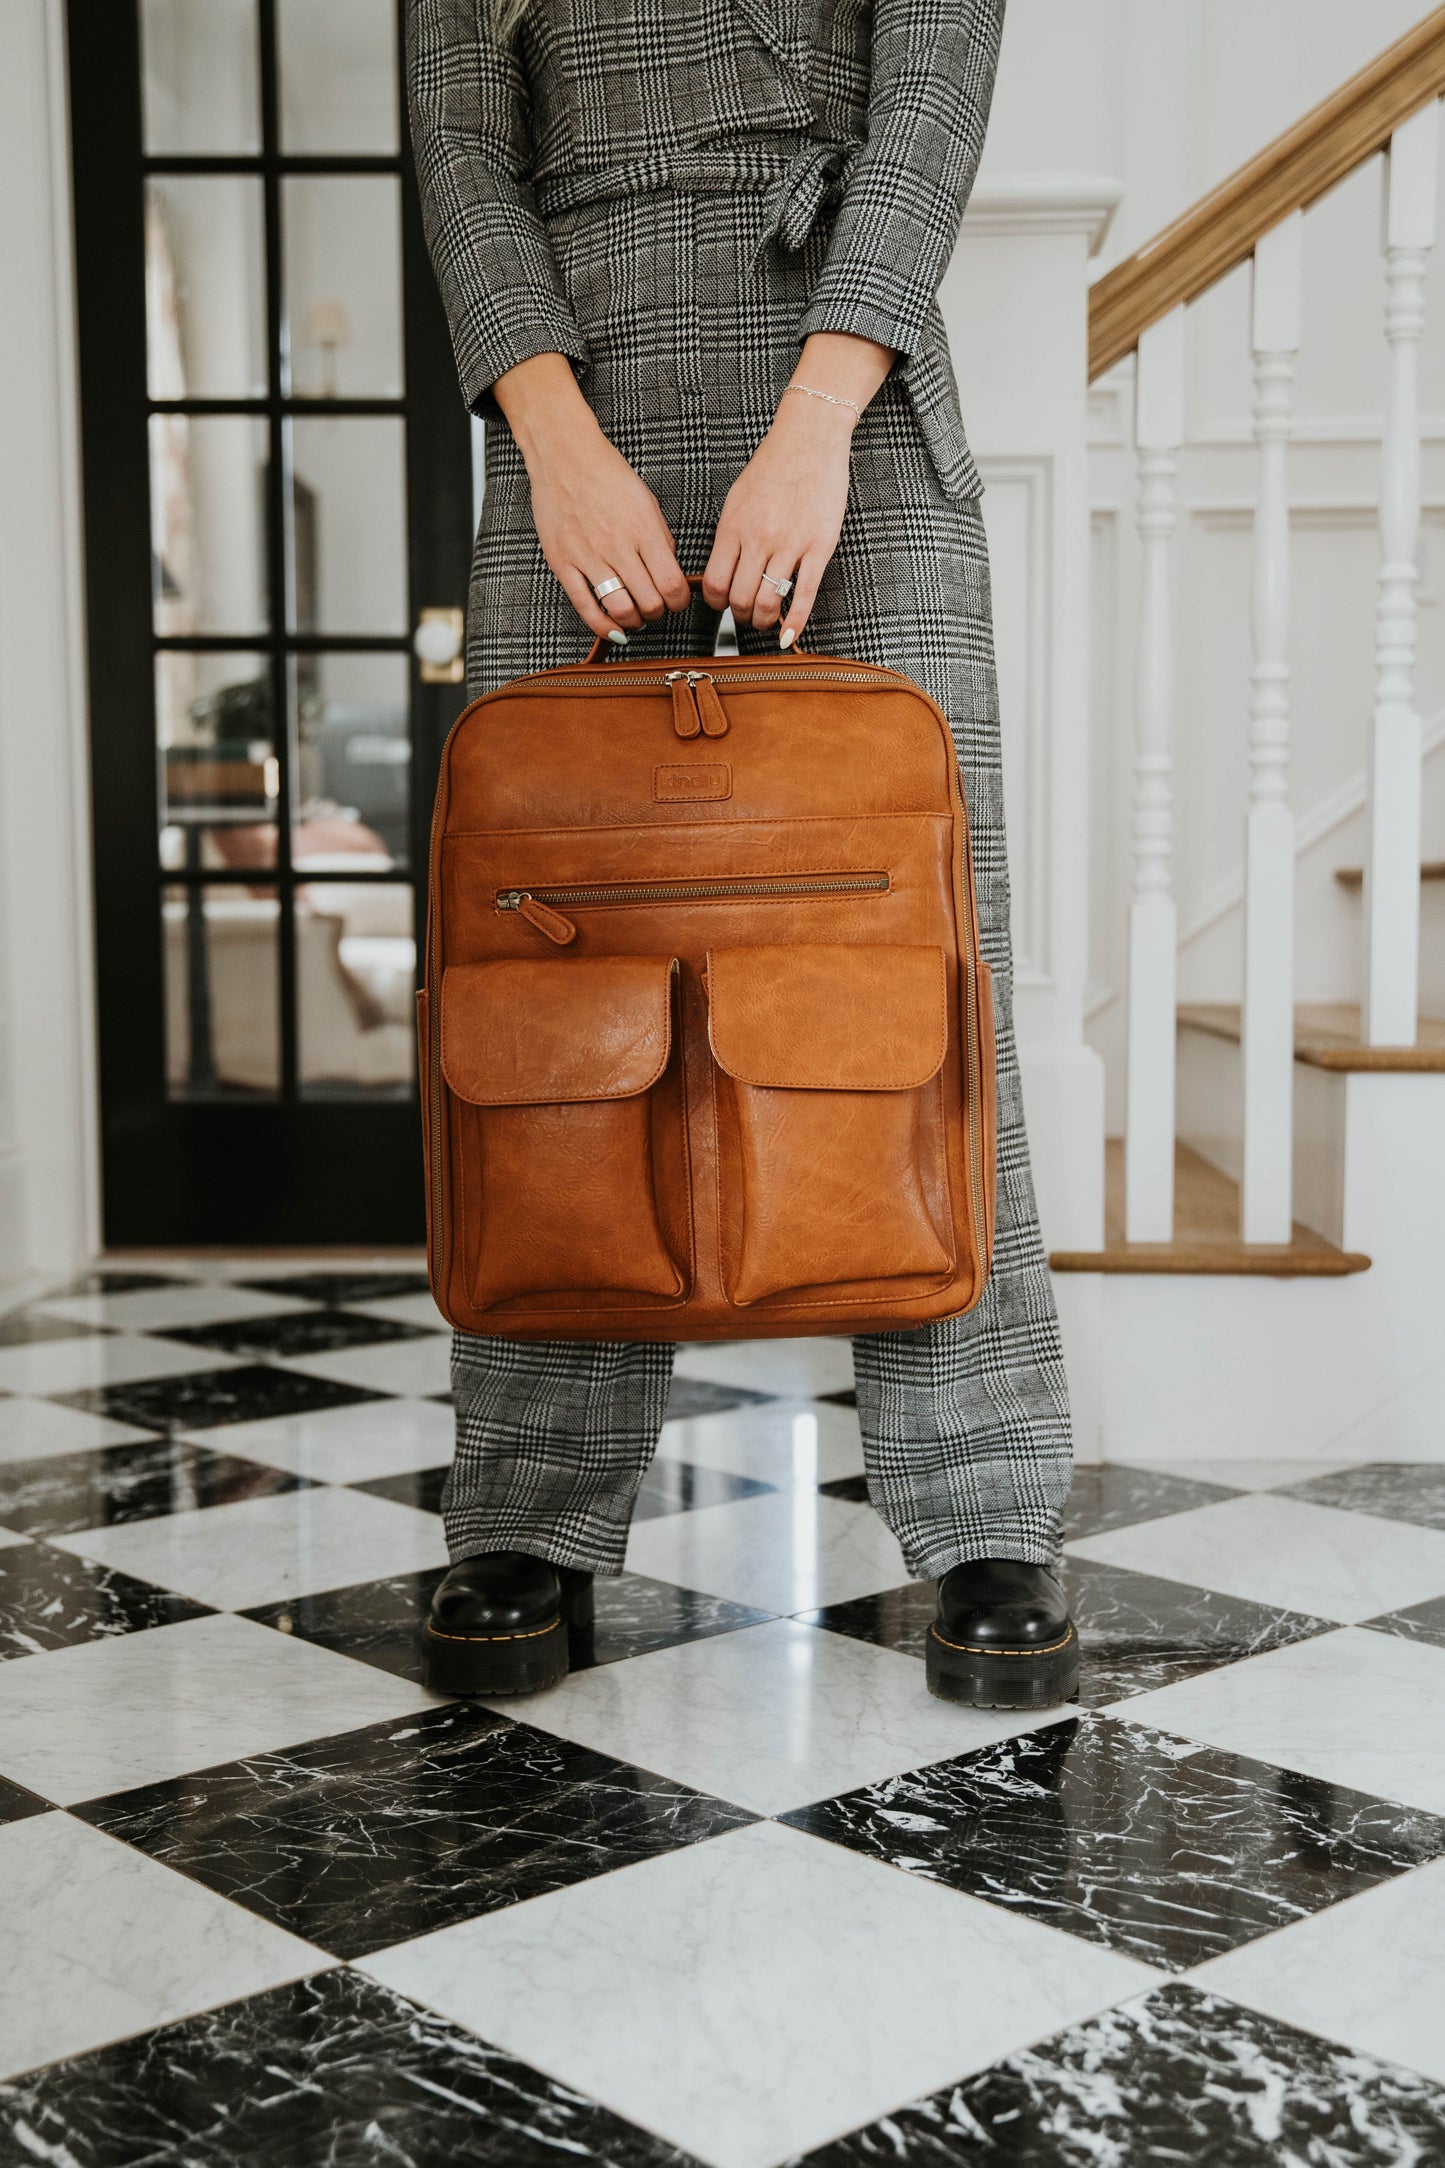 The Jenessa - Our Full Size Camera Backpack (BLACK is a pre-order for late October Shipping)